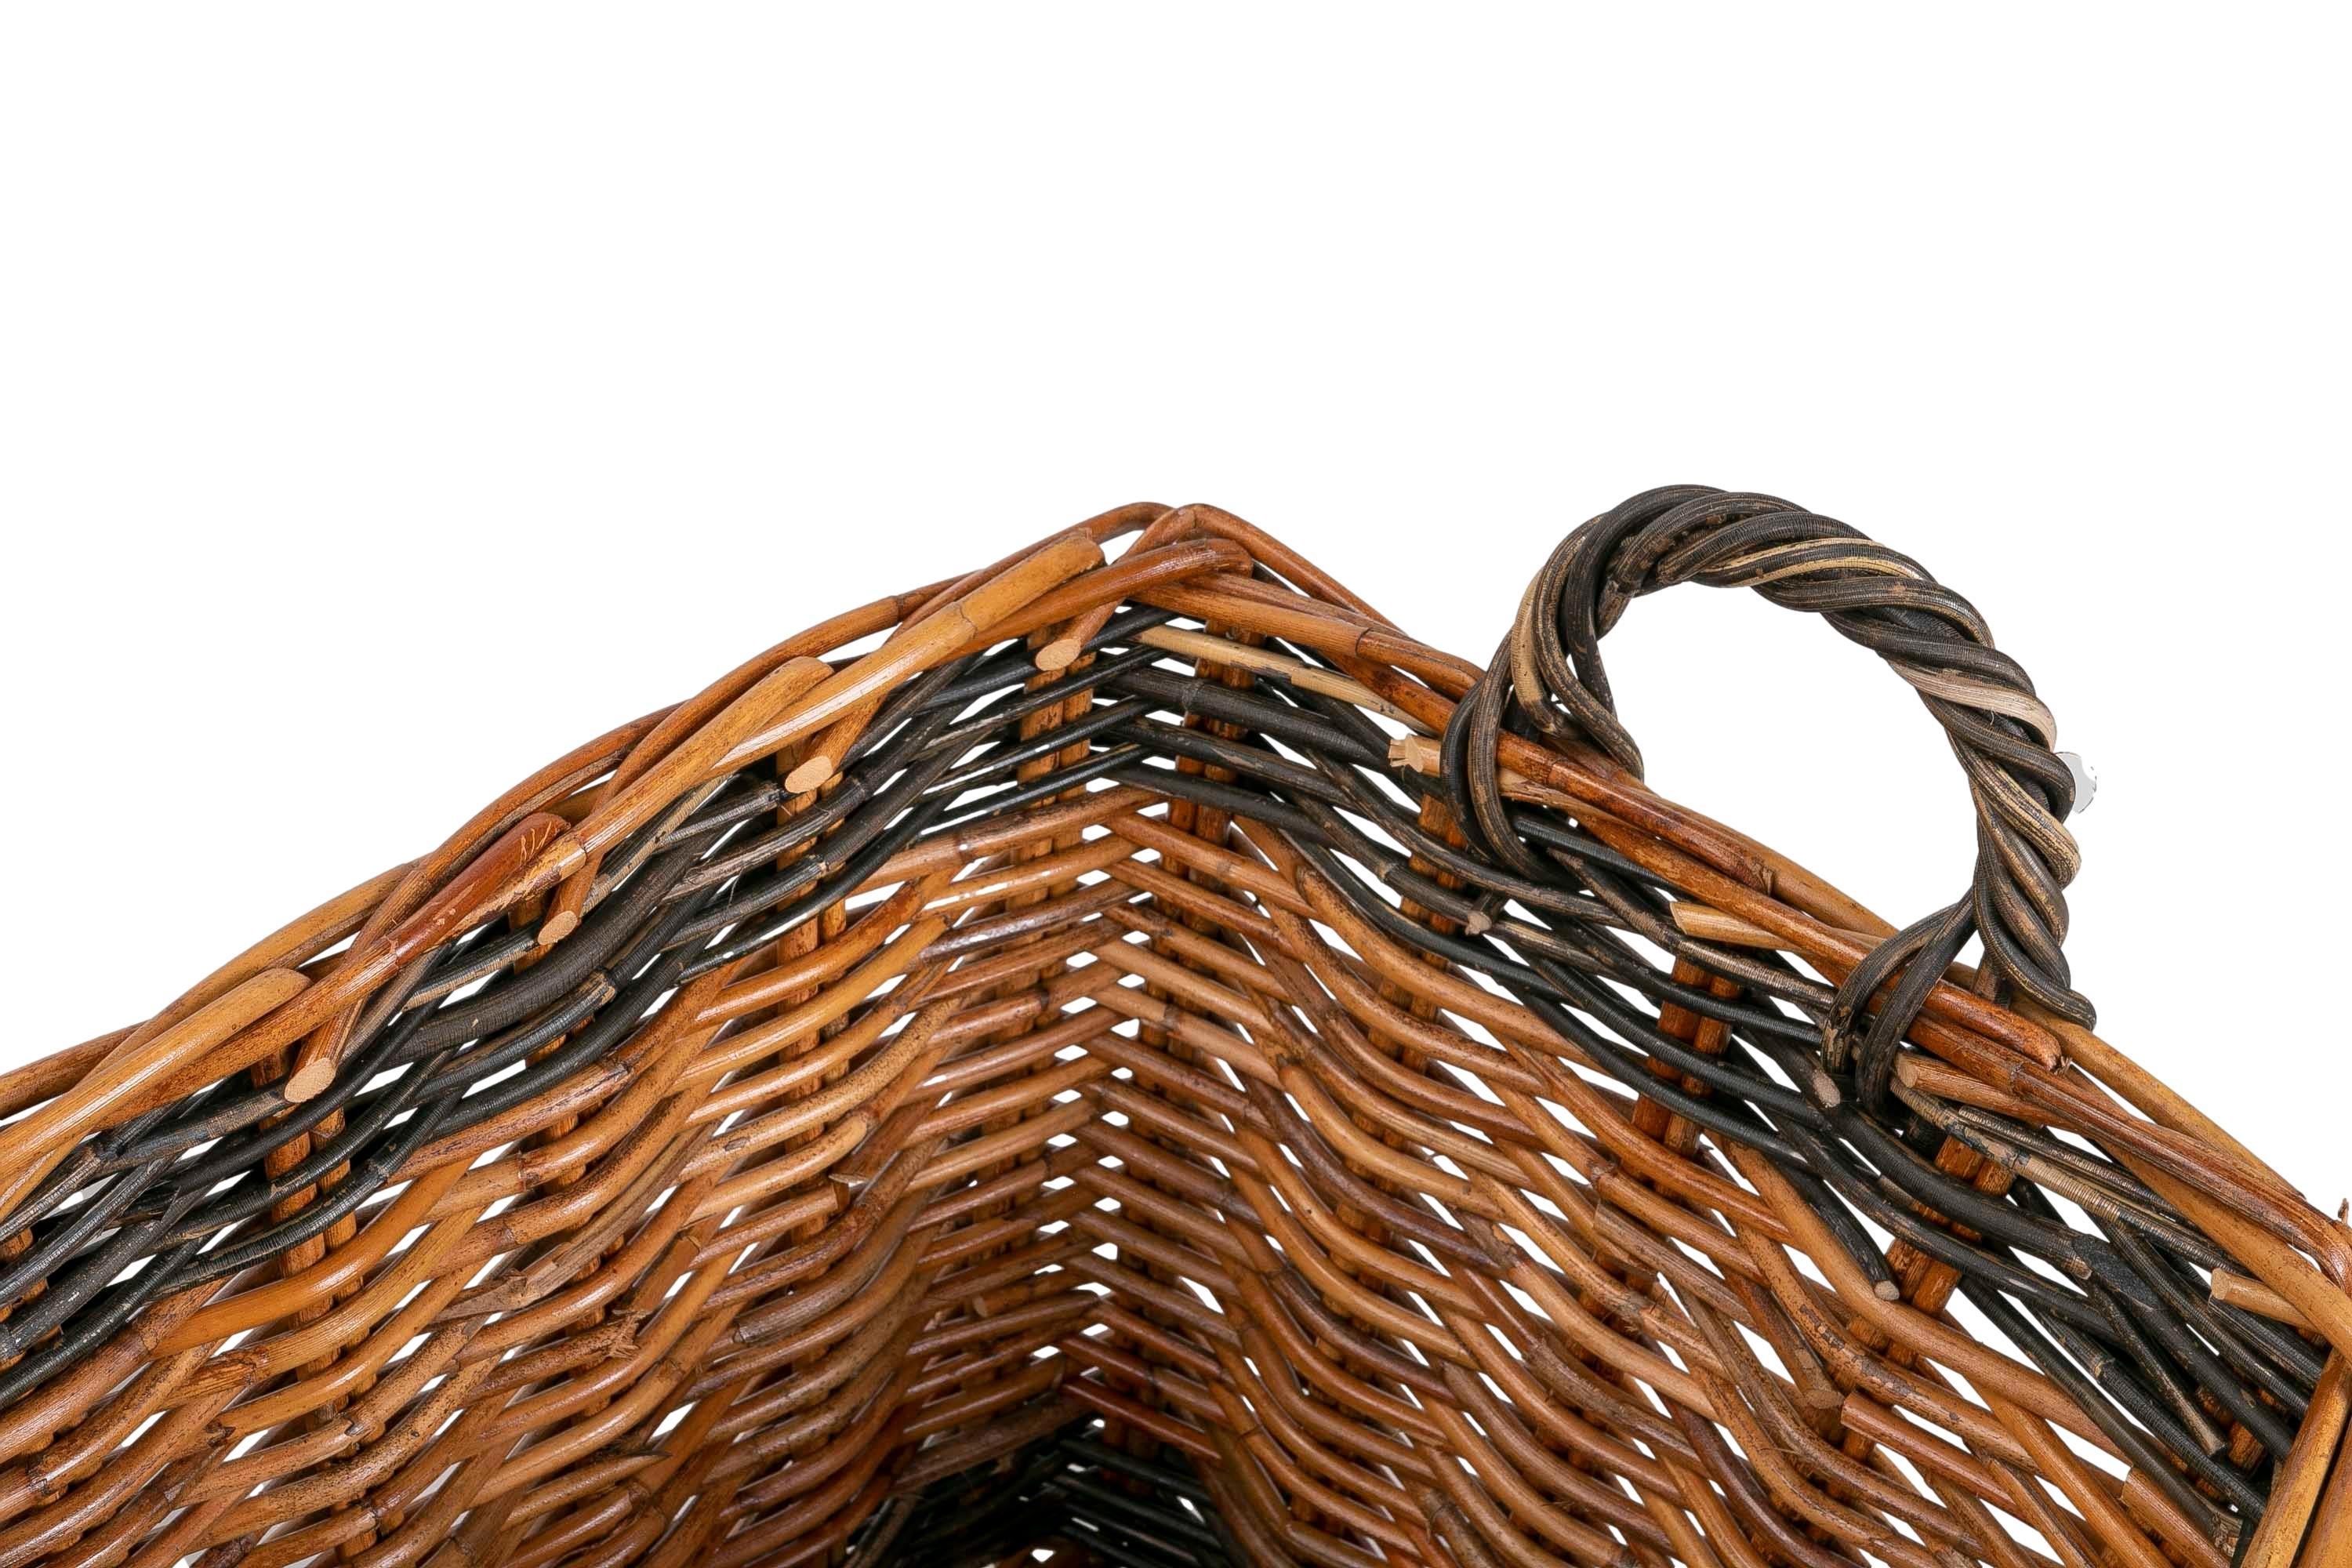 Set Consisting of Three Decorative Wicker Baskets of Different Sizes For Sale 5